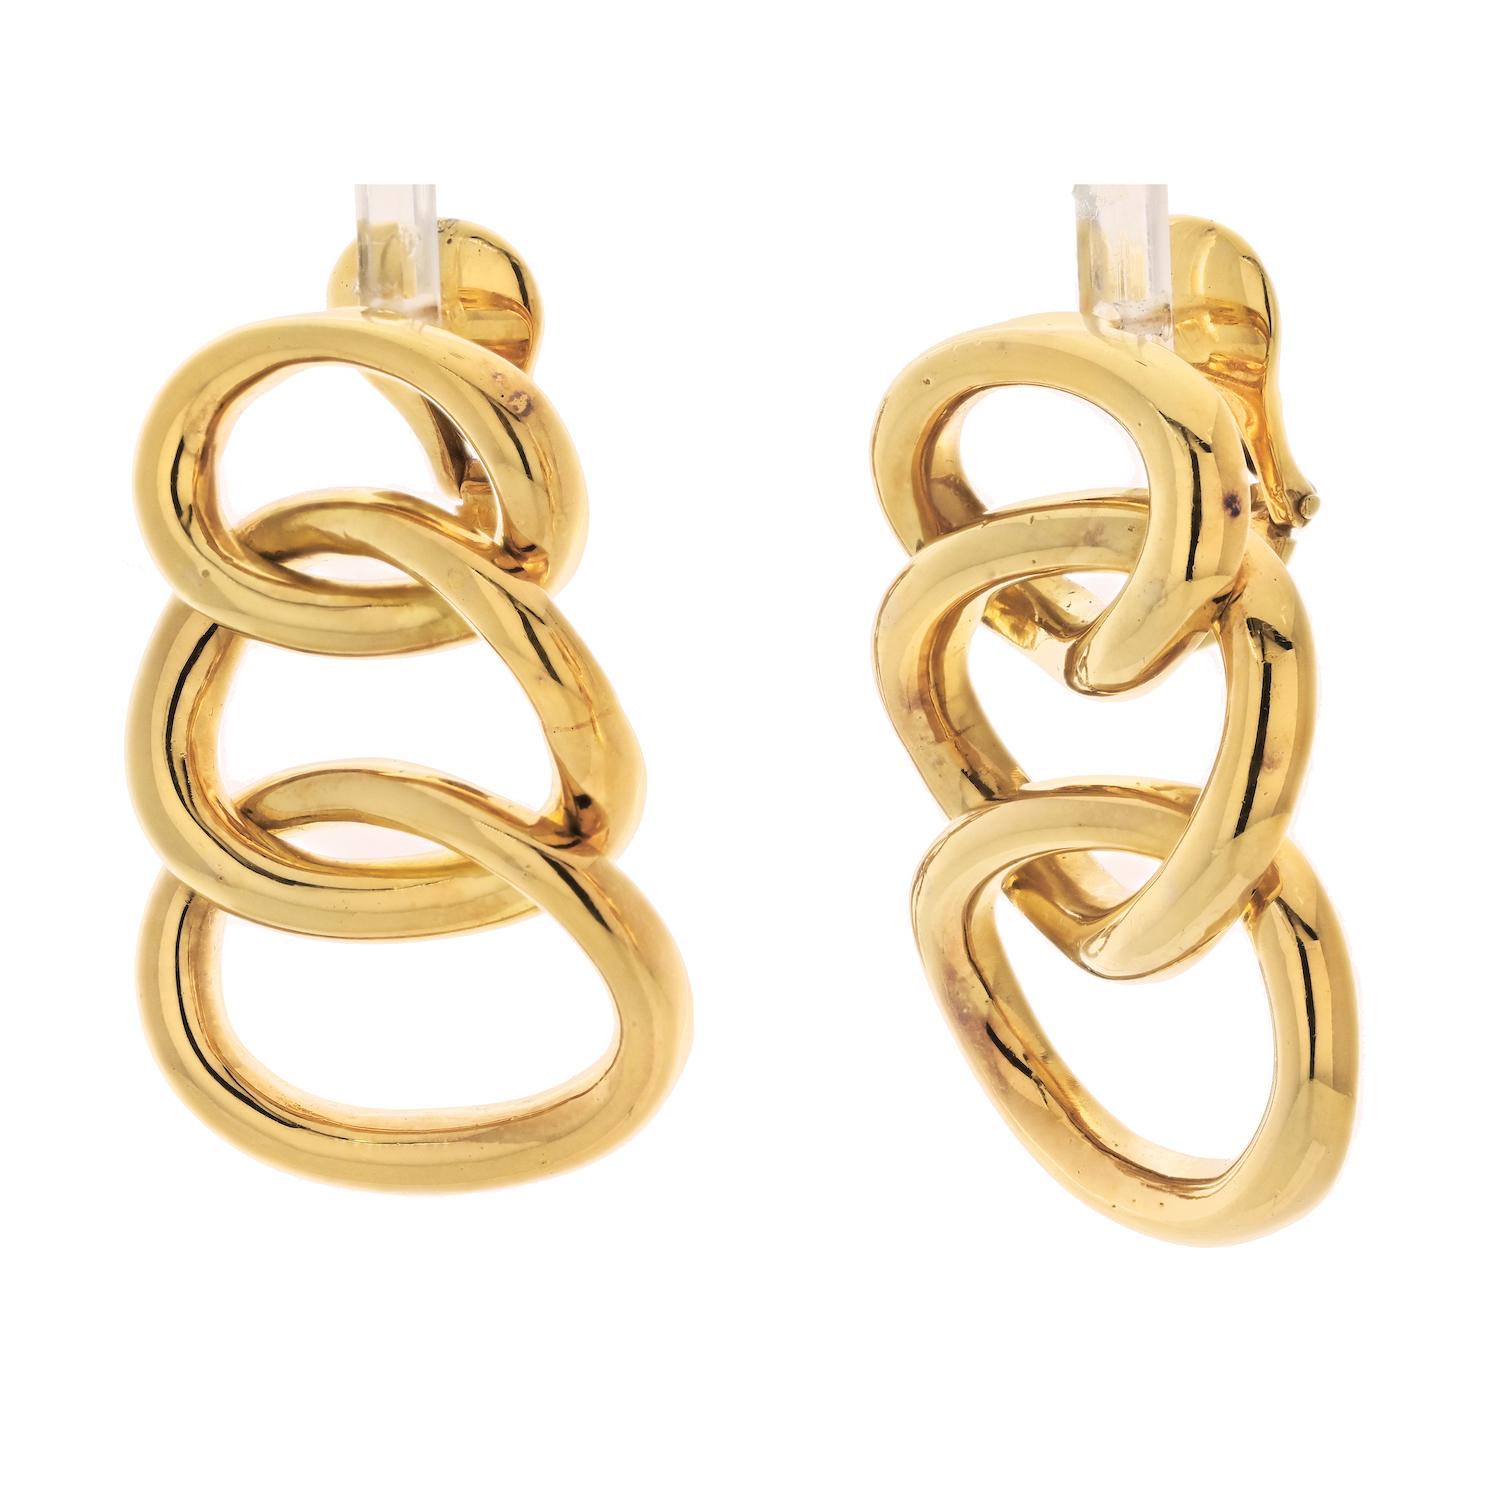 The David Webb 18K Yellow Gold triple Oval Layered Hoop Style Clip On Earrings are a stunning example of the designer's artistry and skill. 

These earrings feature a layered hoop design, with three ovals stacked on top of one another to create a